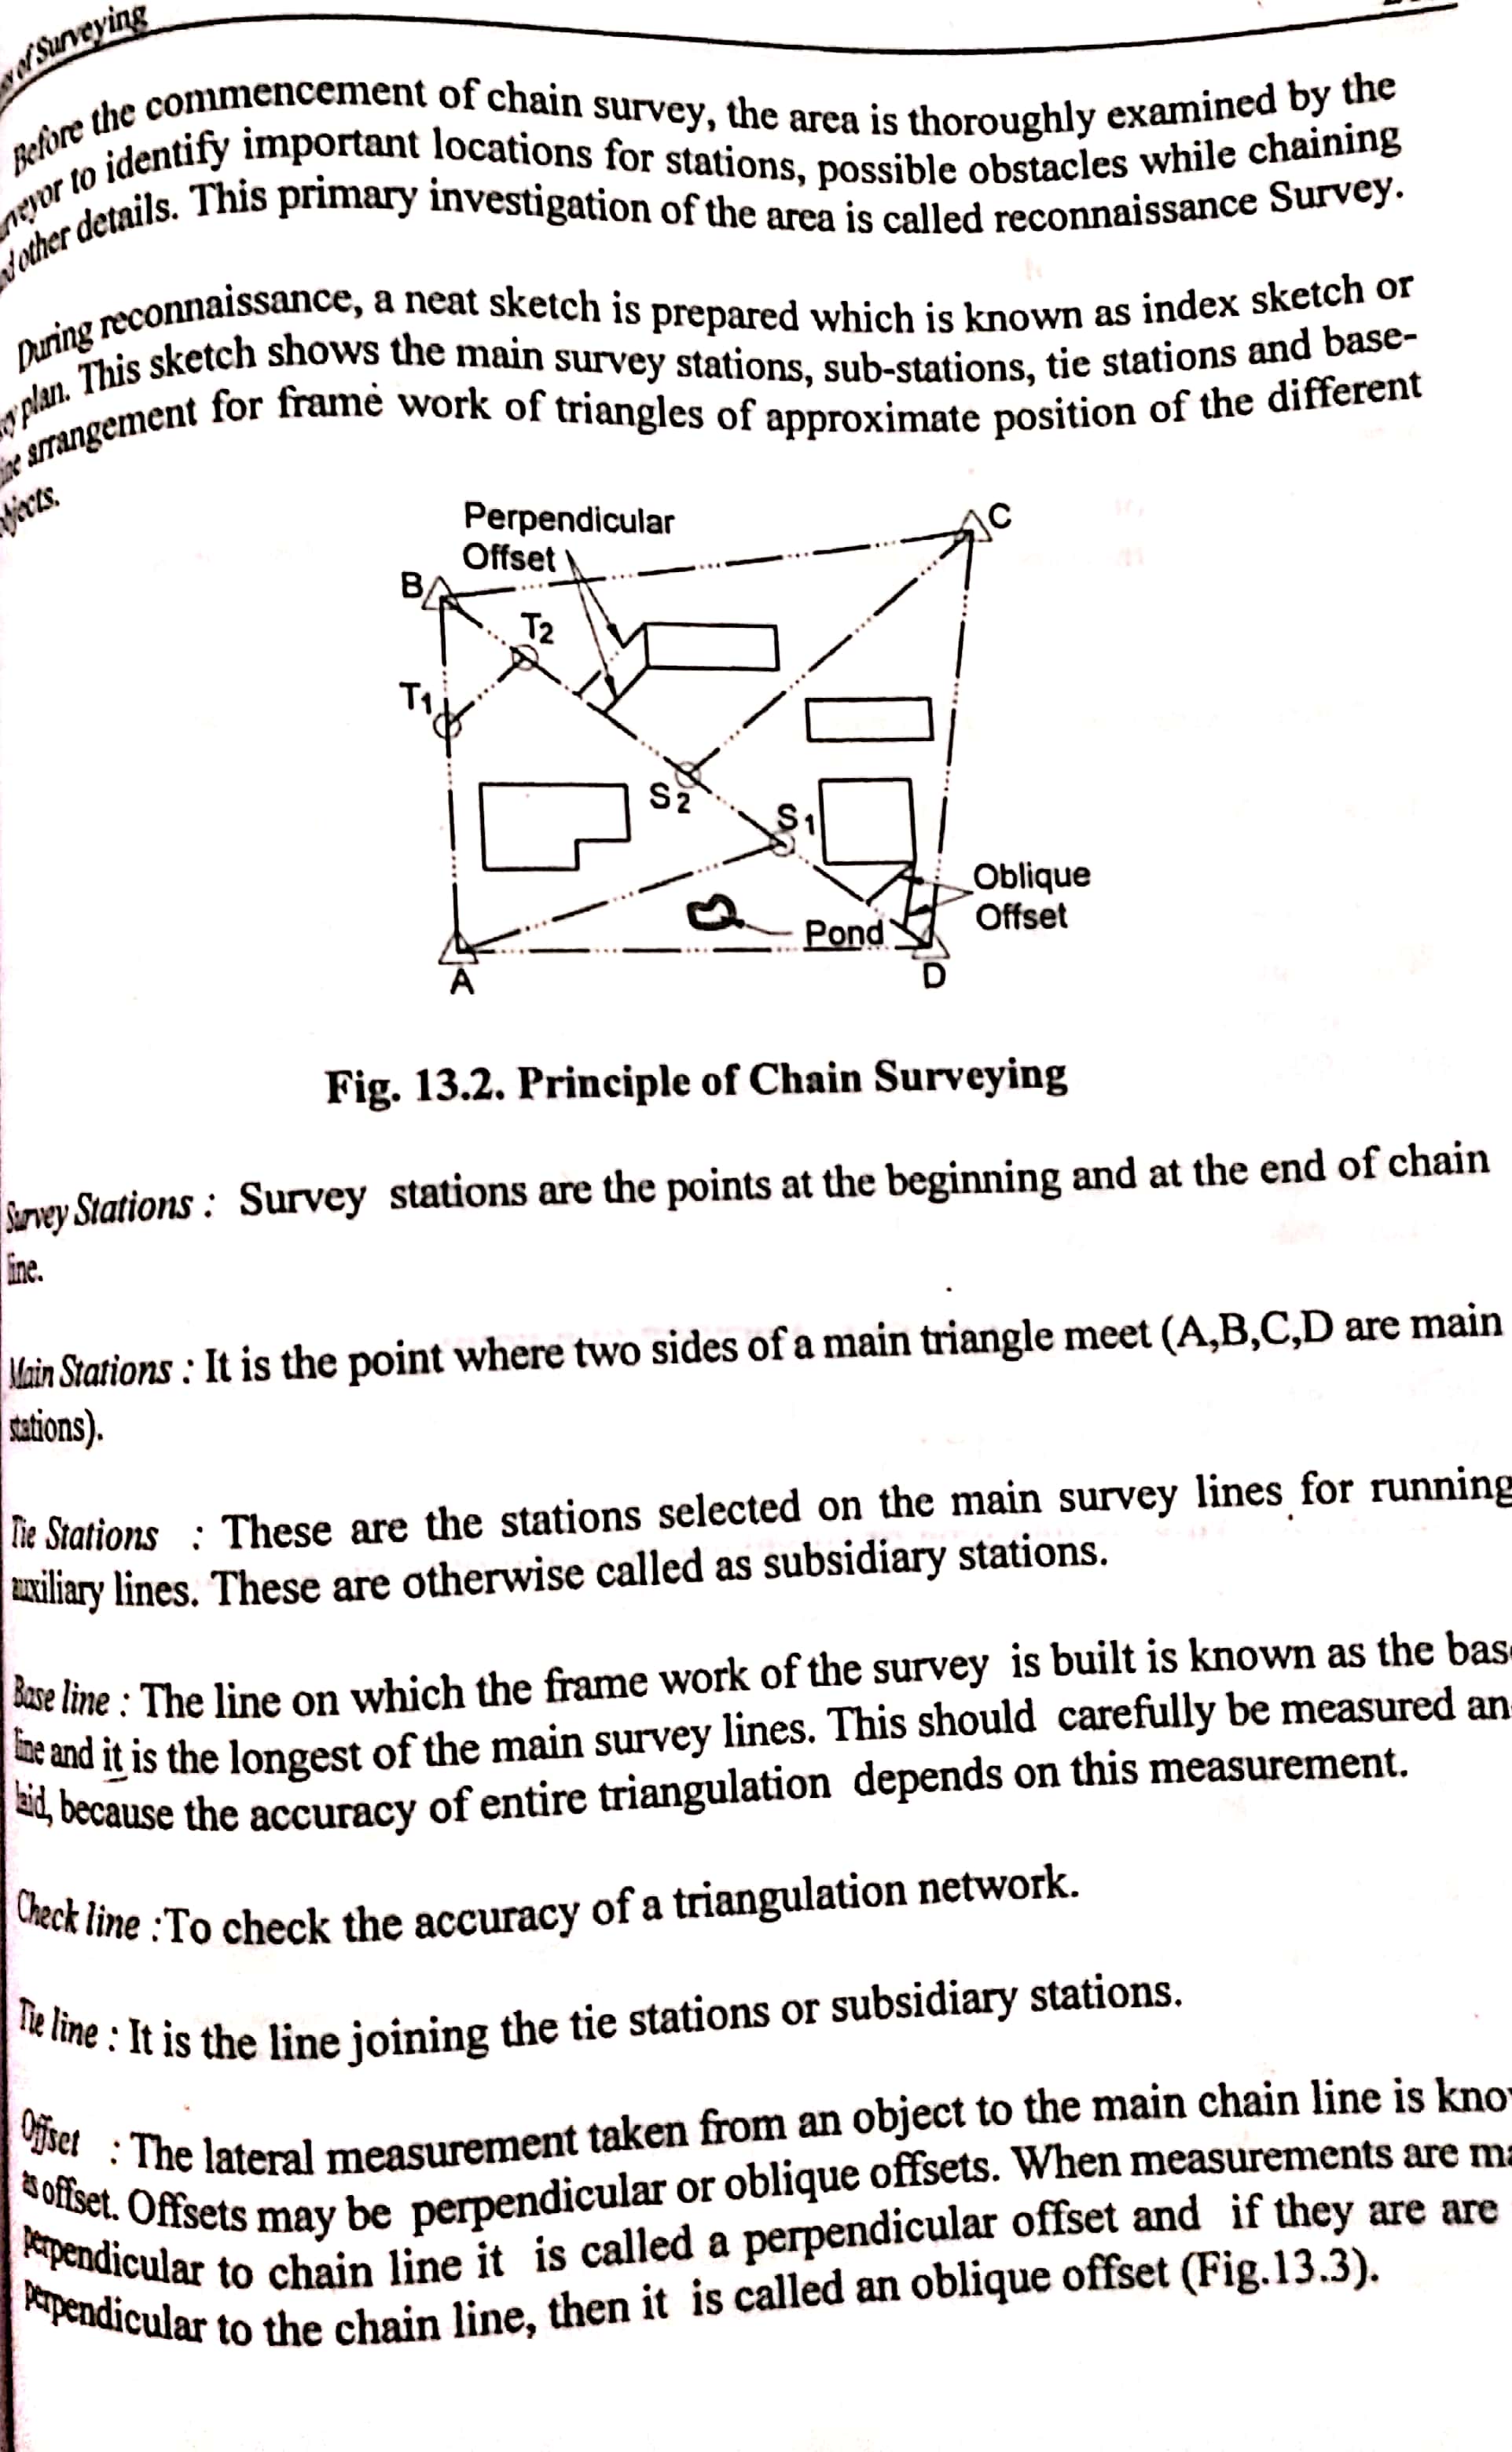 Element of surveying and classification of surveying -New Doc 2019-11-30 20.41.41_100.jpg